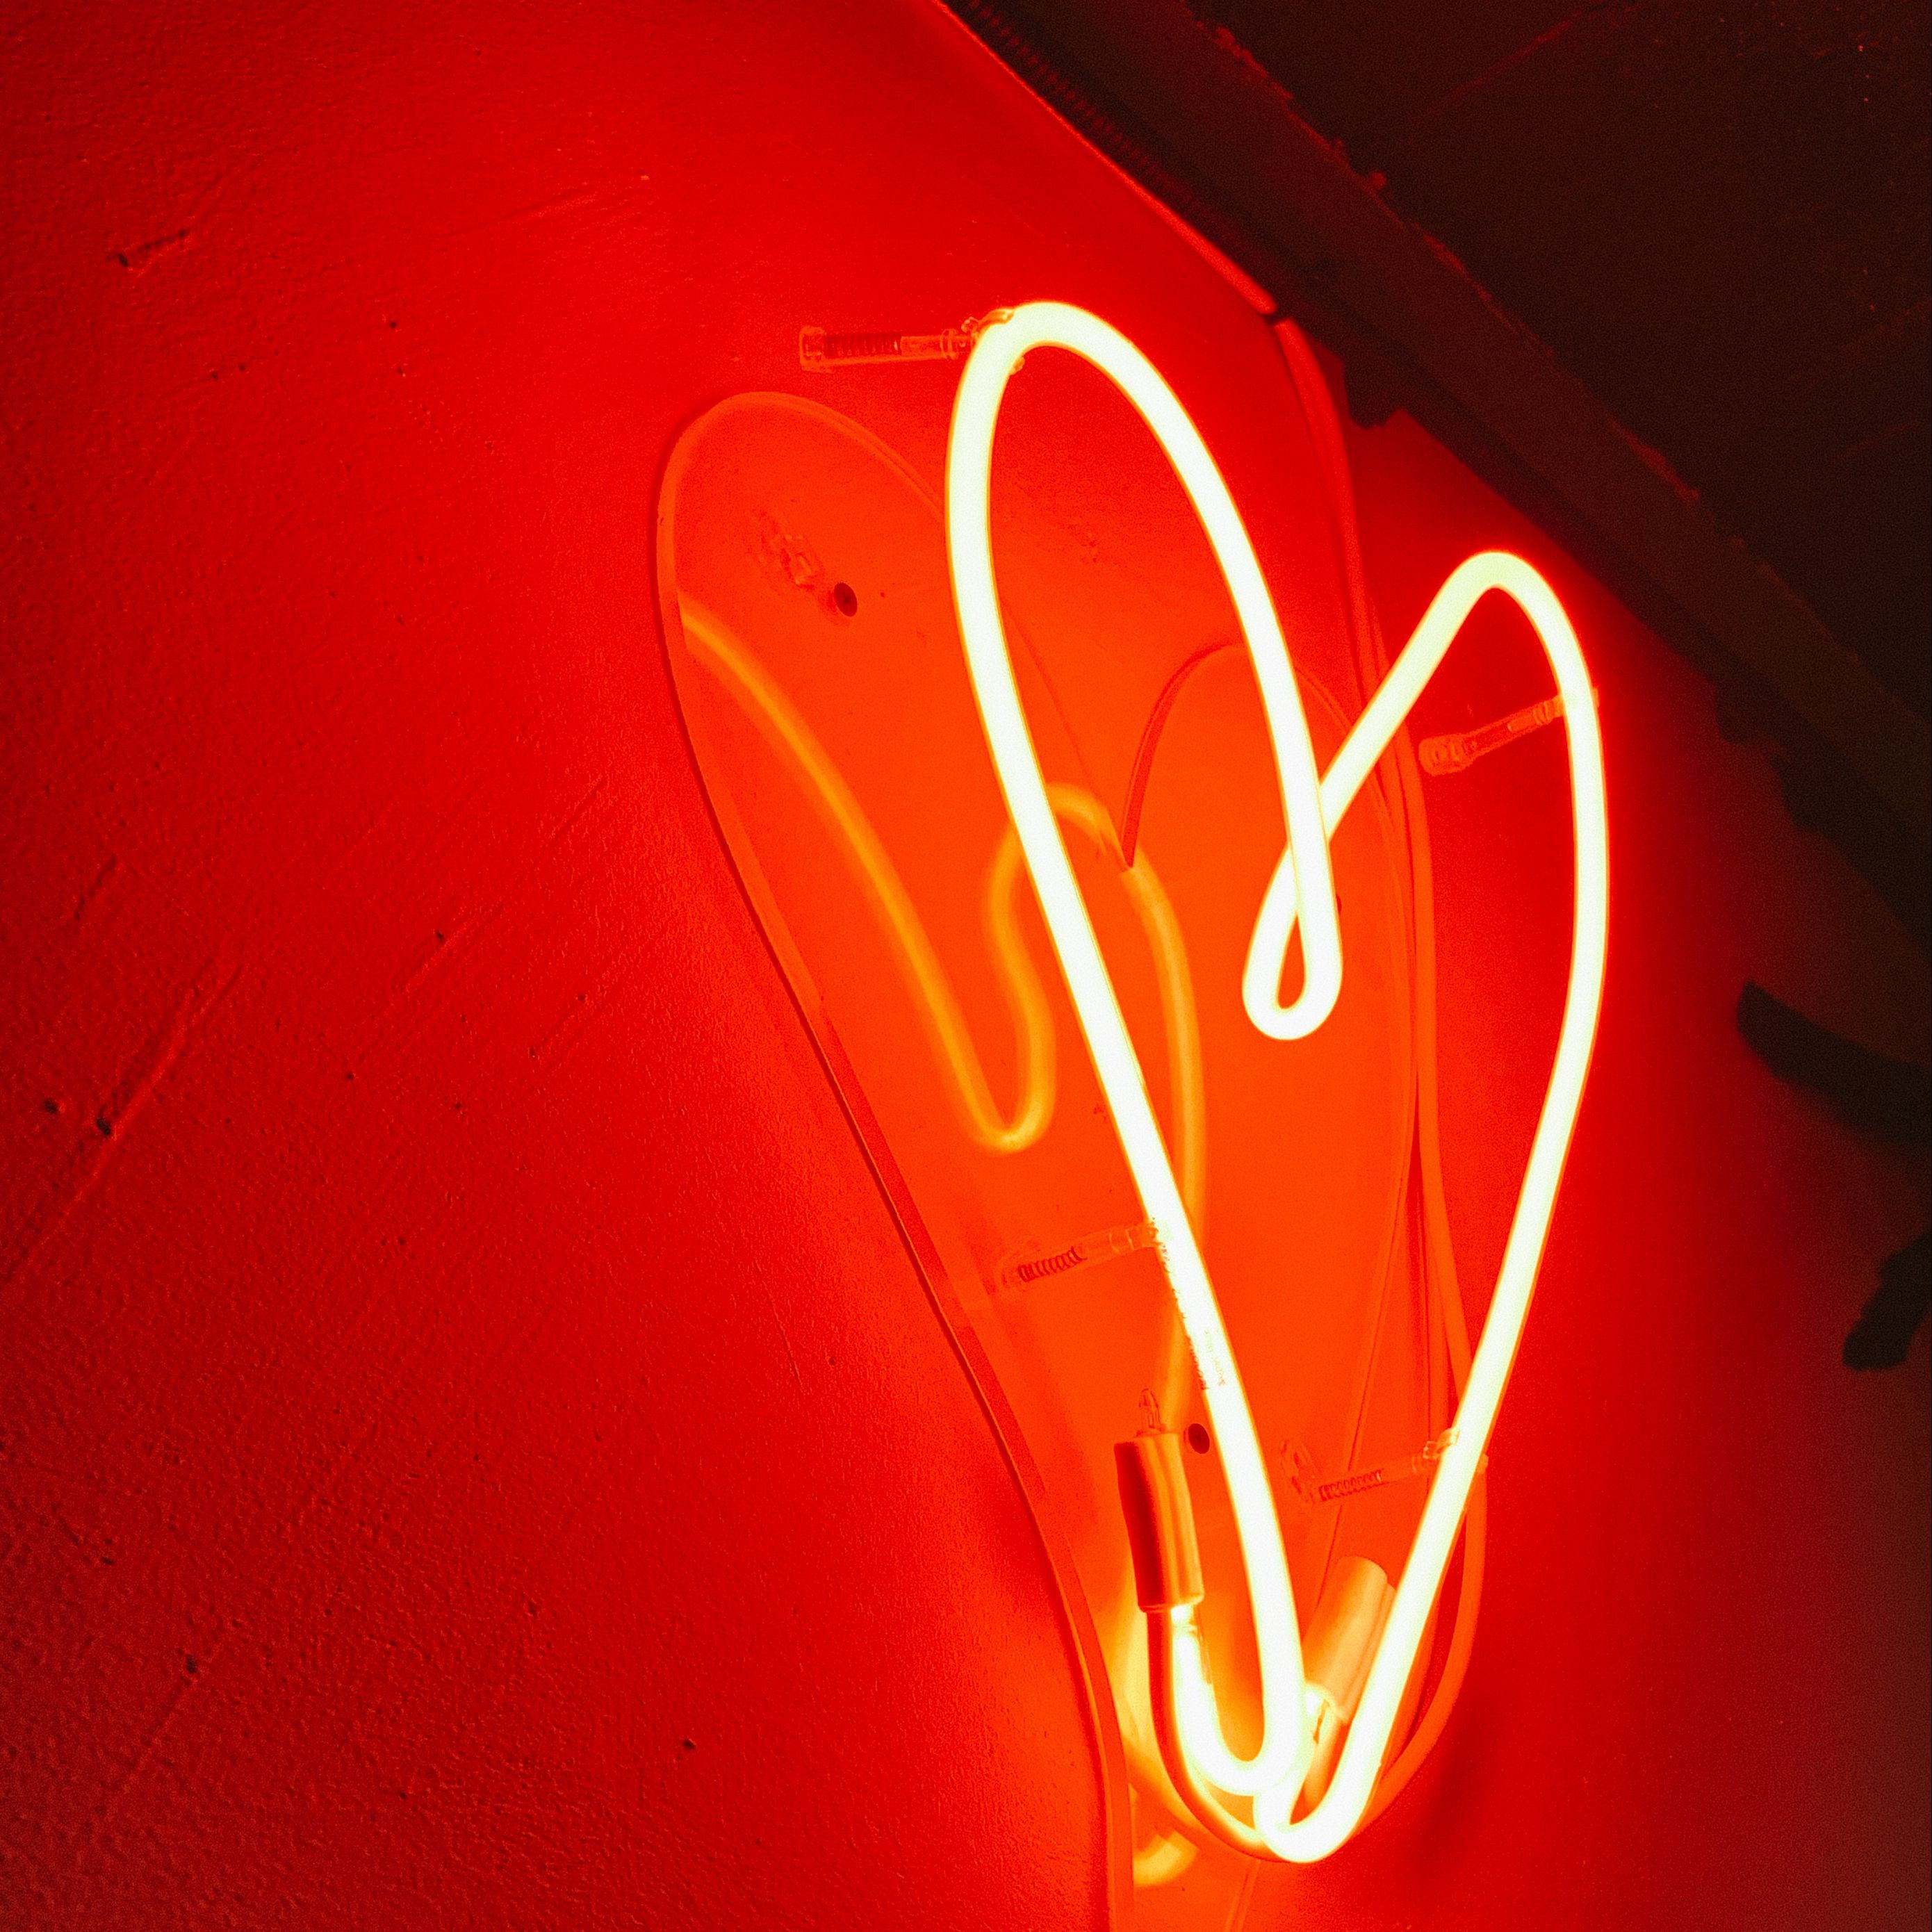 A heart-shaped neon sign glows against a red wall. - Light red